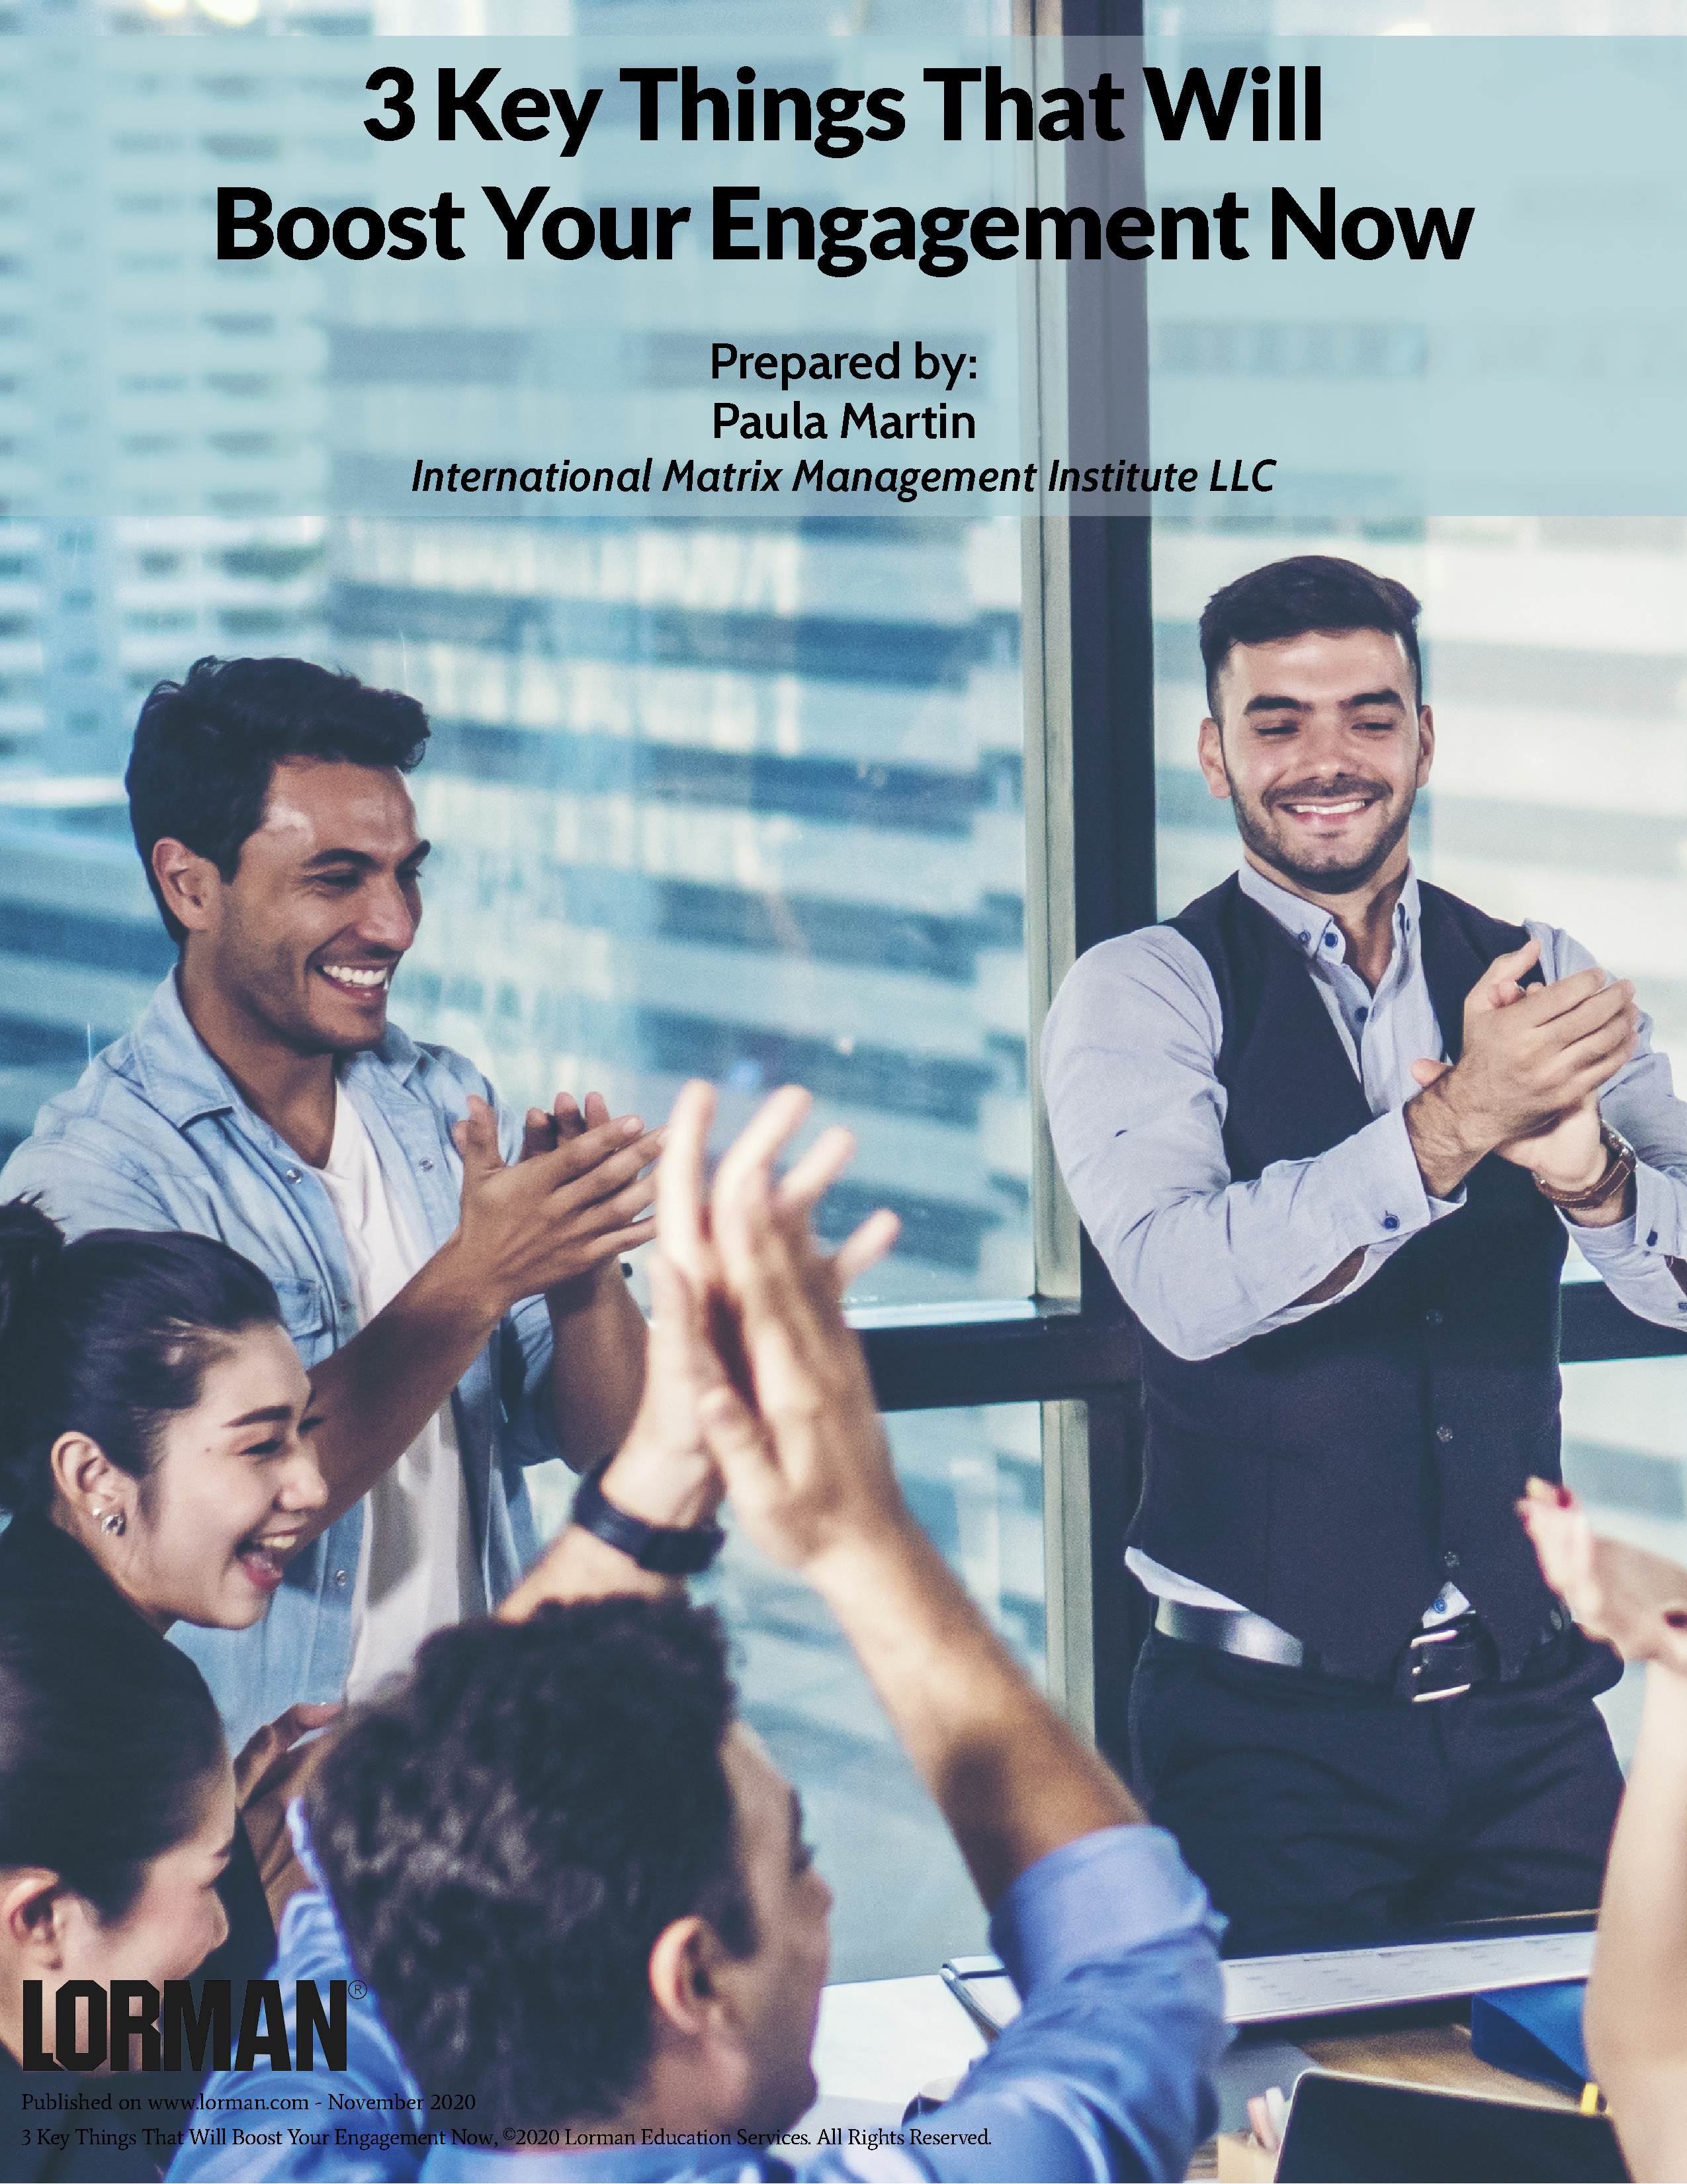 3 Key Things That Will Boost Your Engagement Now